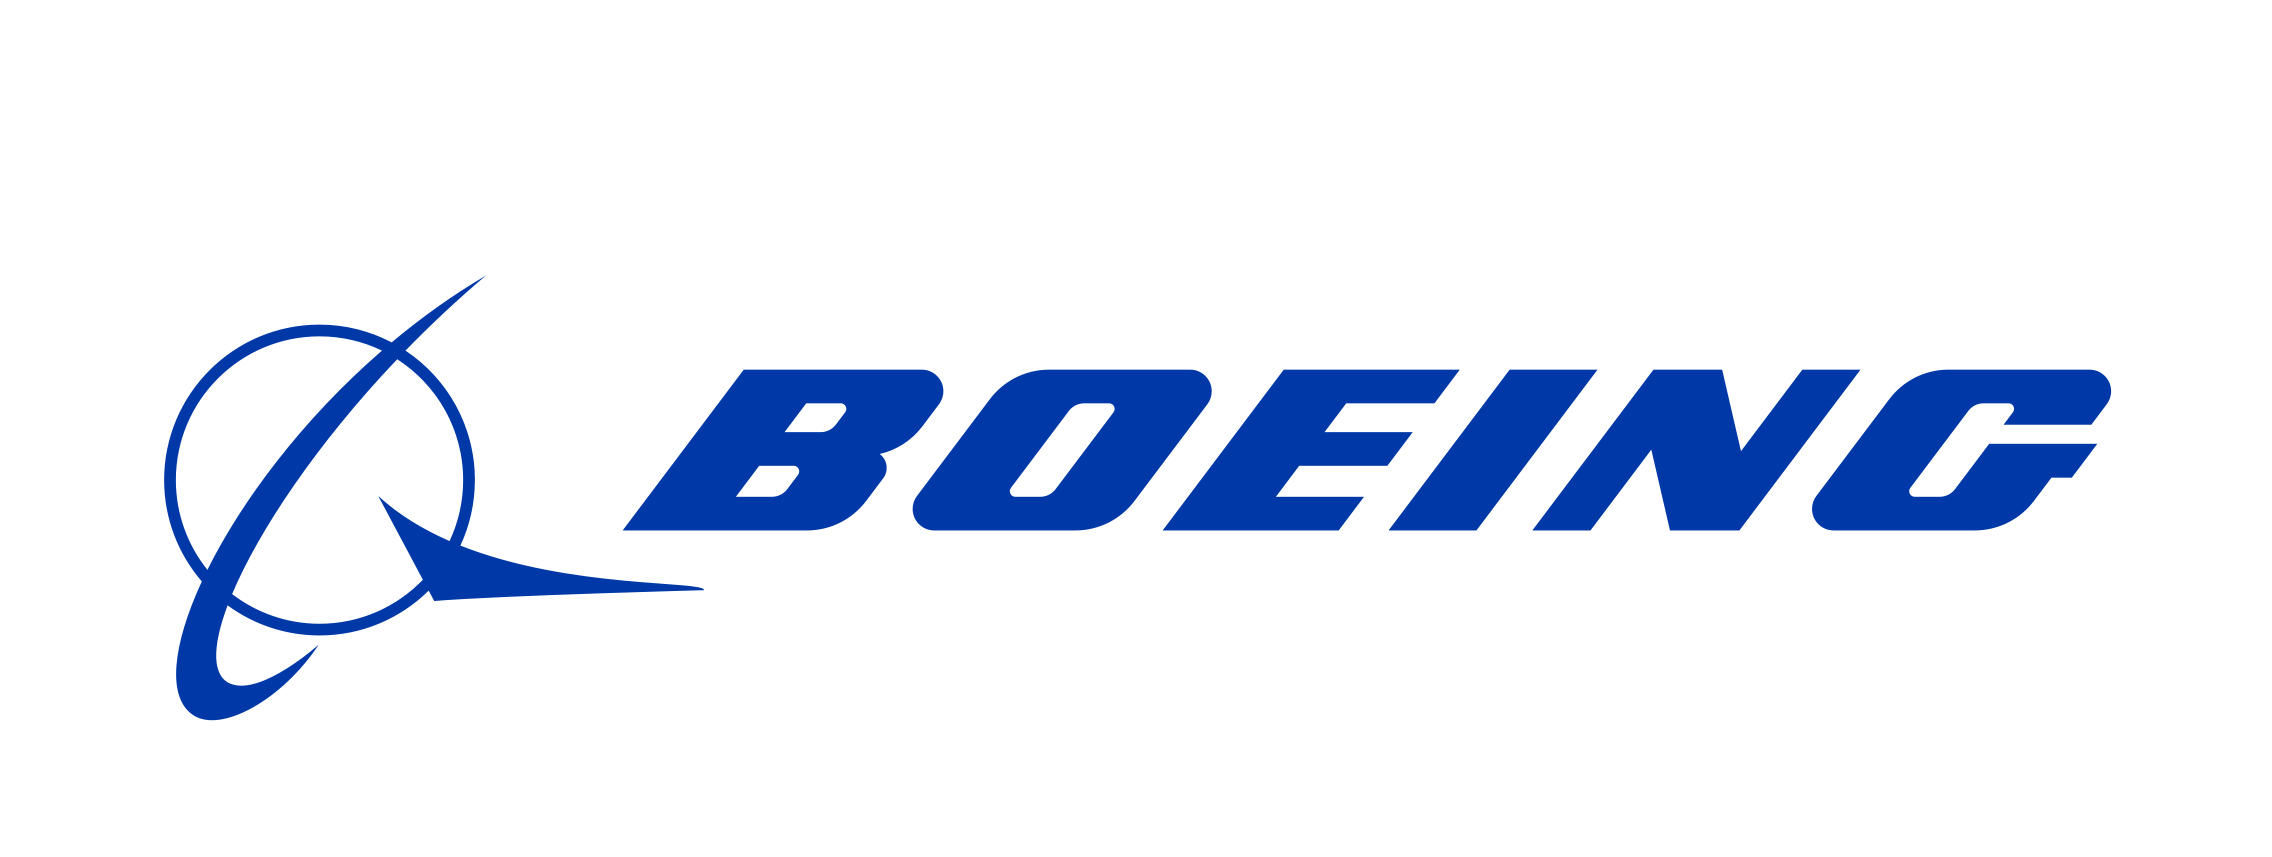 boeing: boeing india - home